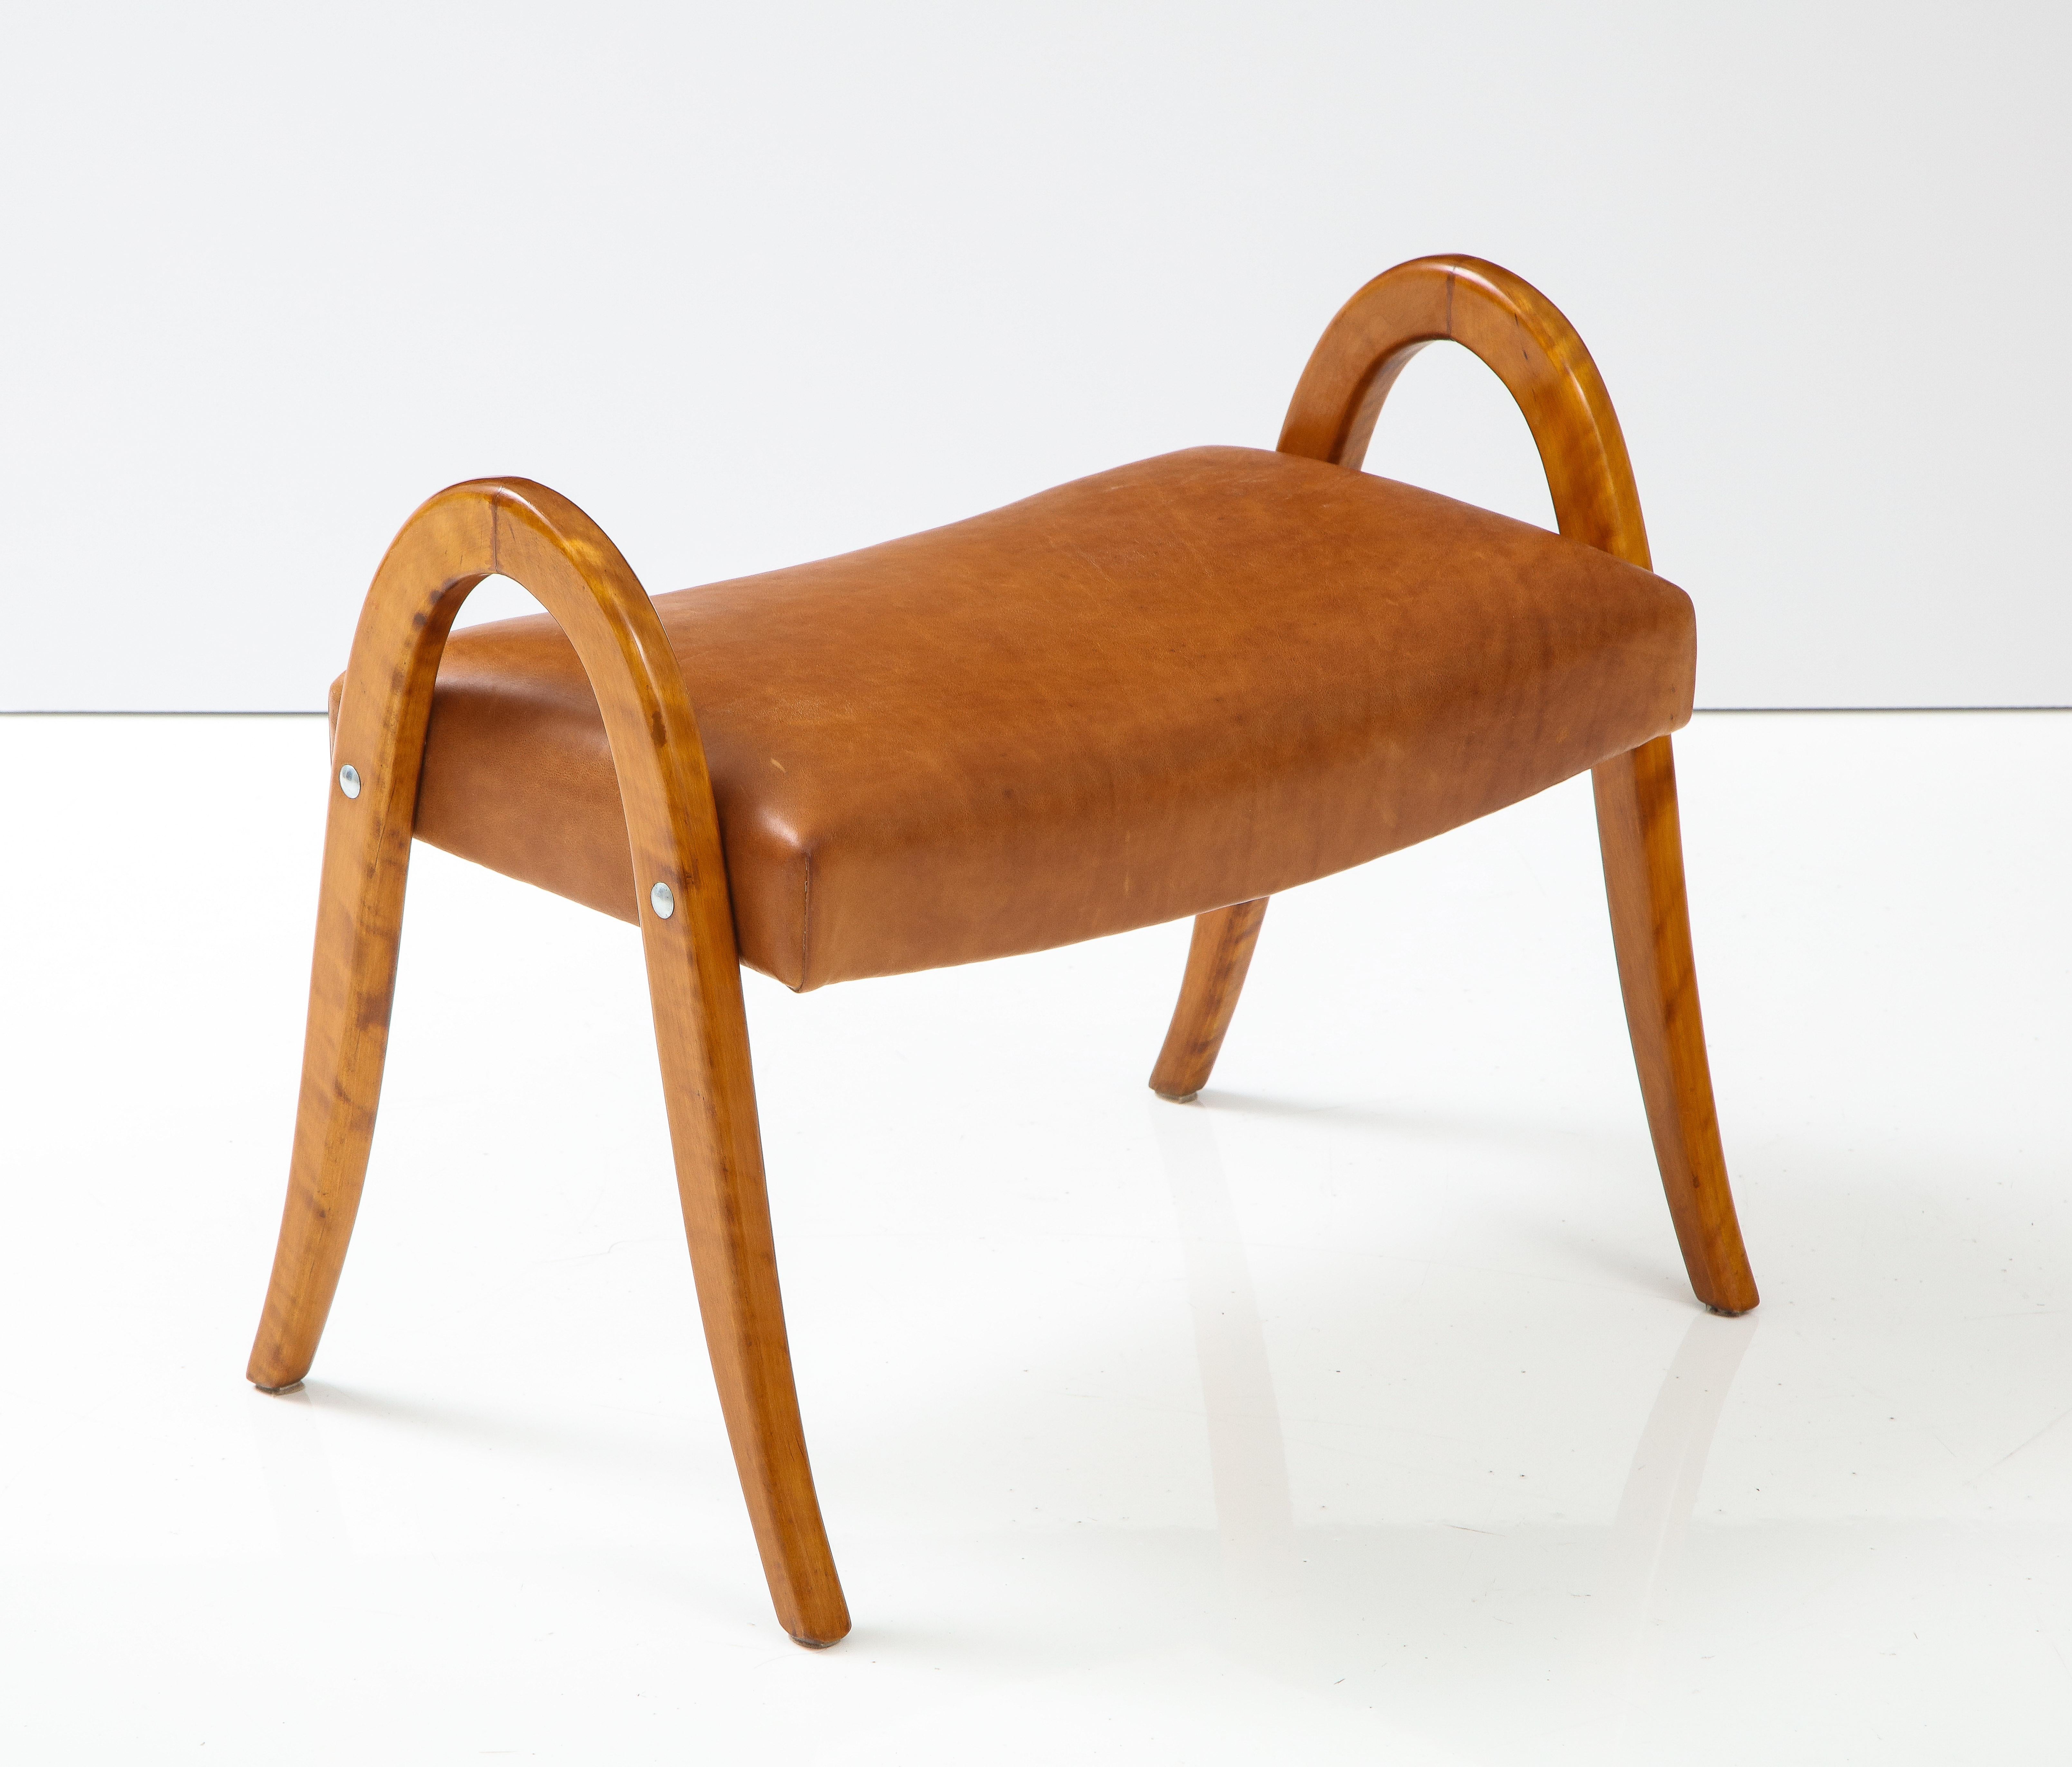 A Swedish Modernist stool, Ca. 1950s, with birch continuous curved supports and a leather upholstered seat.

